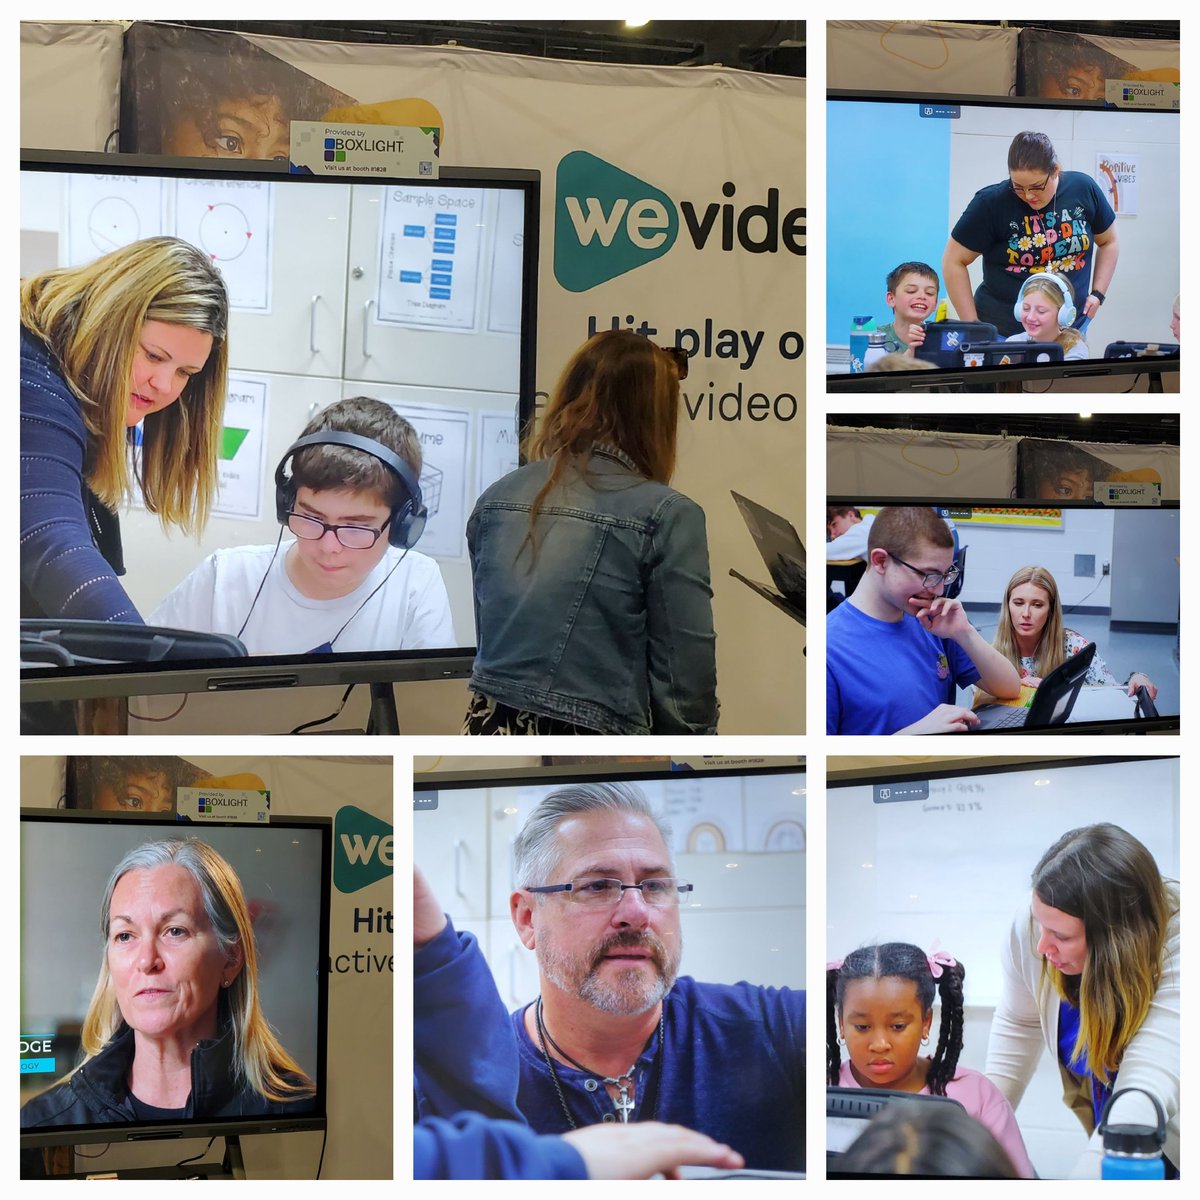 Look who I saw from Virginia Beach at the @WeVideo booth at #ISTELive23 #vbits @KESamazing @HRichardson_VB